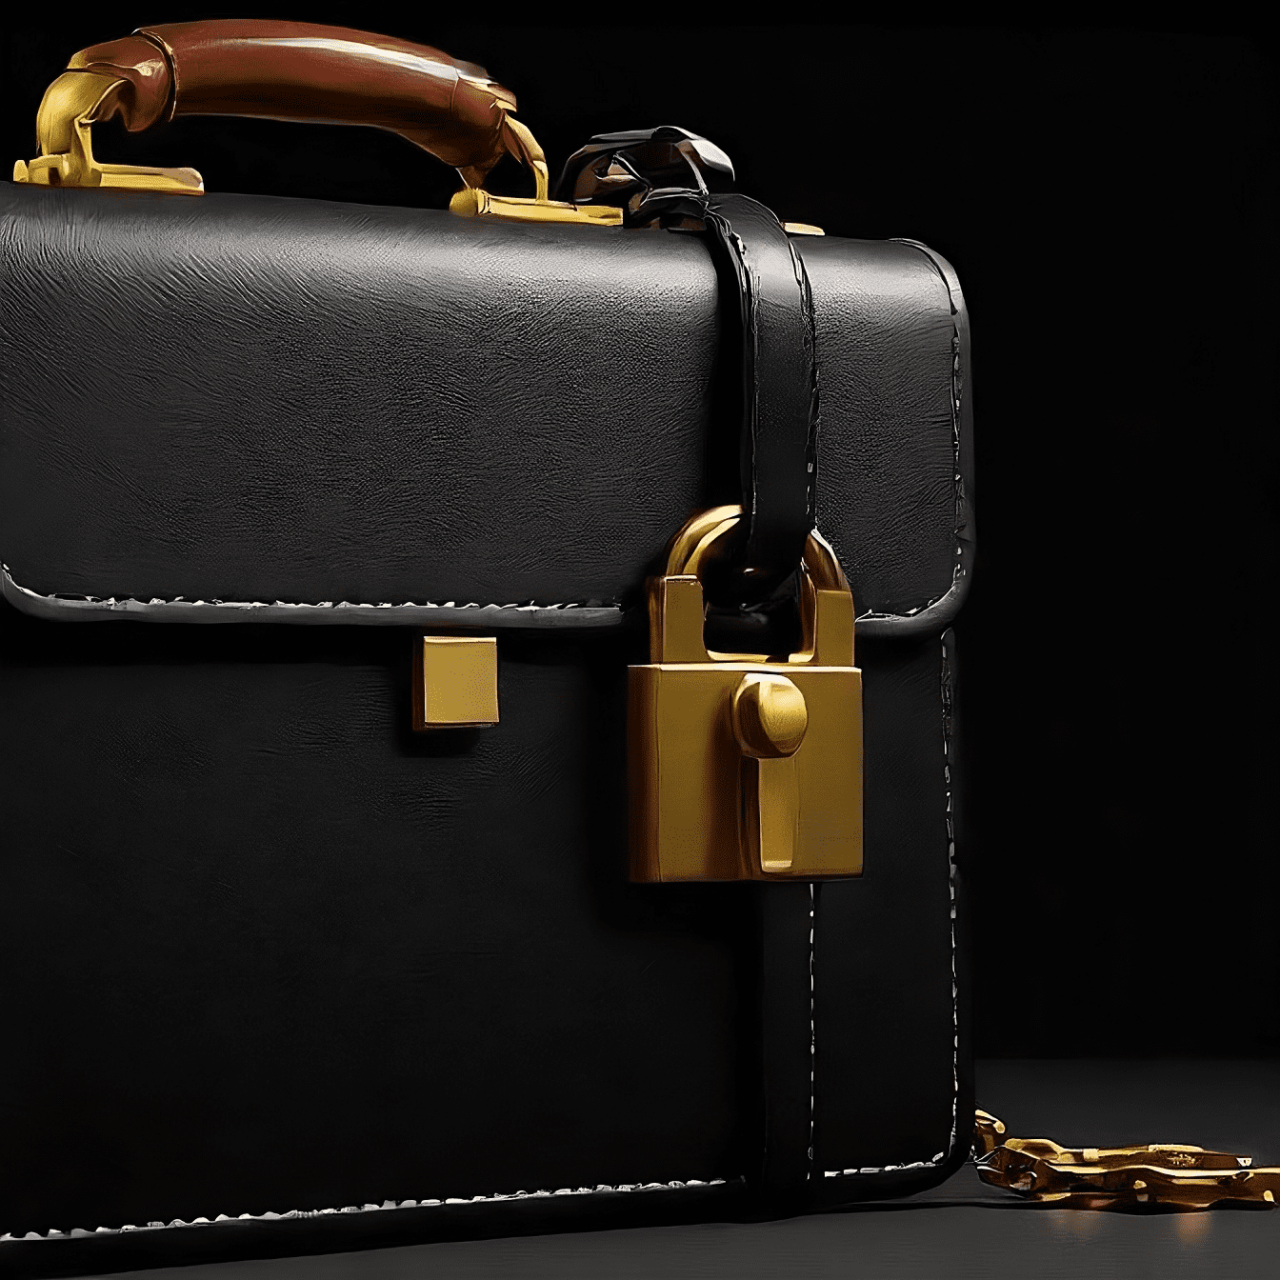 A black briefcase with a gold lock, perfect for keeping your belongings secure and organized.